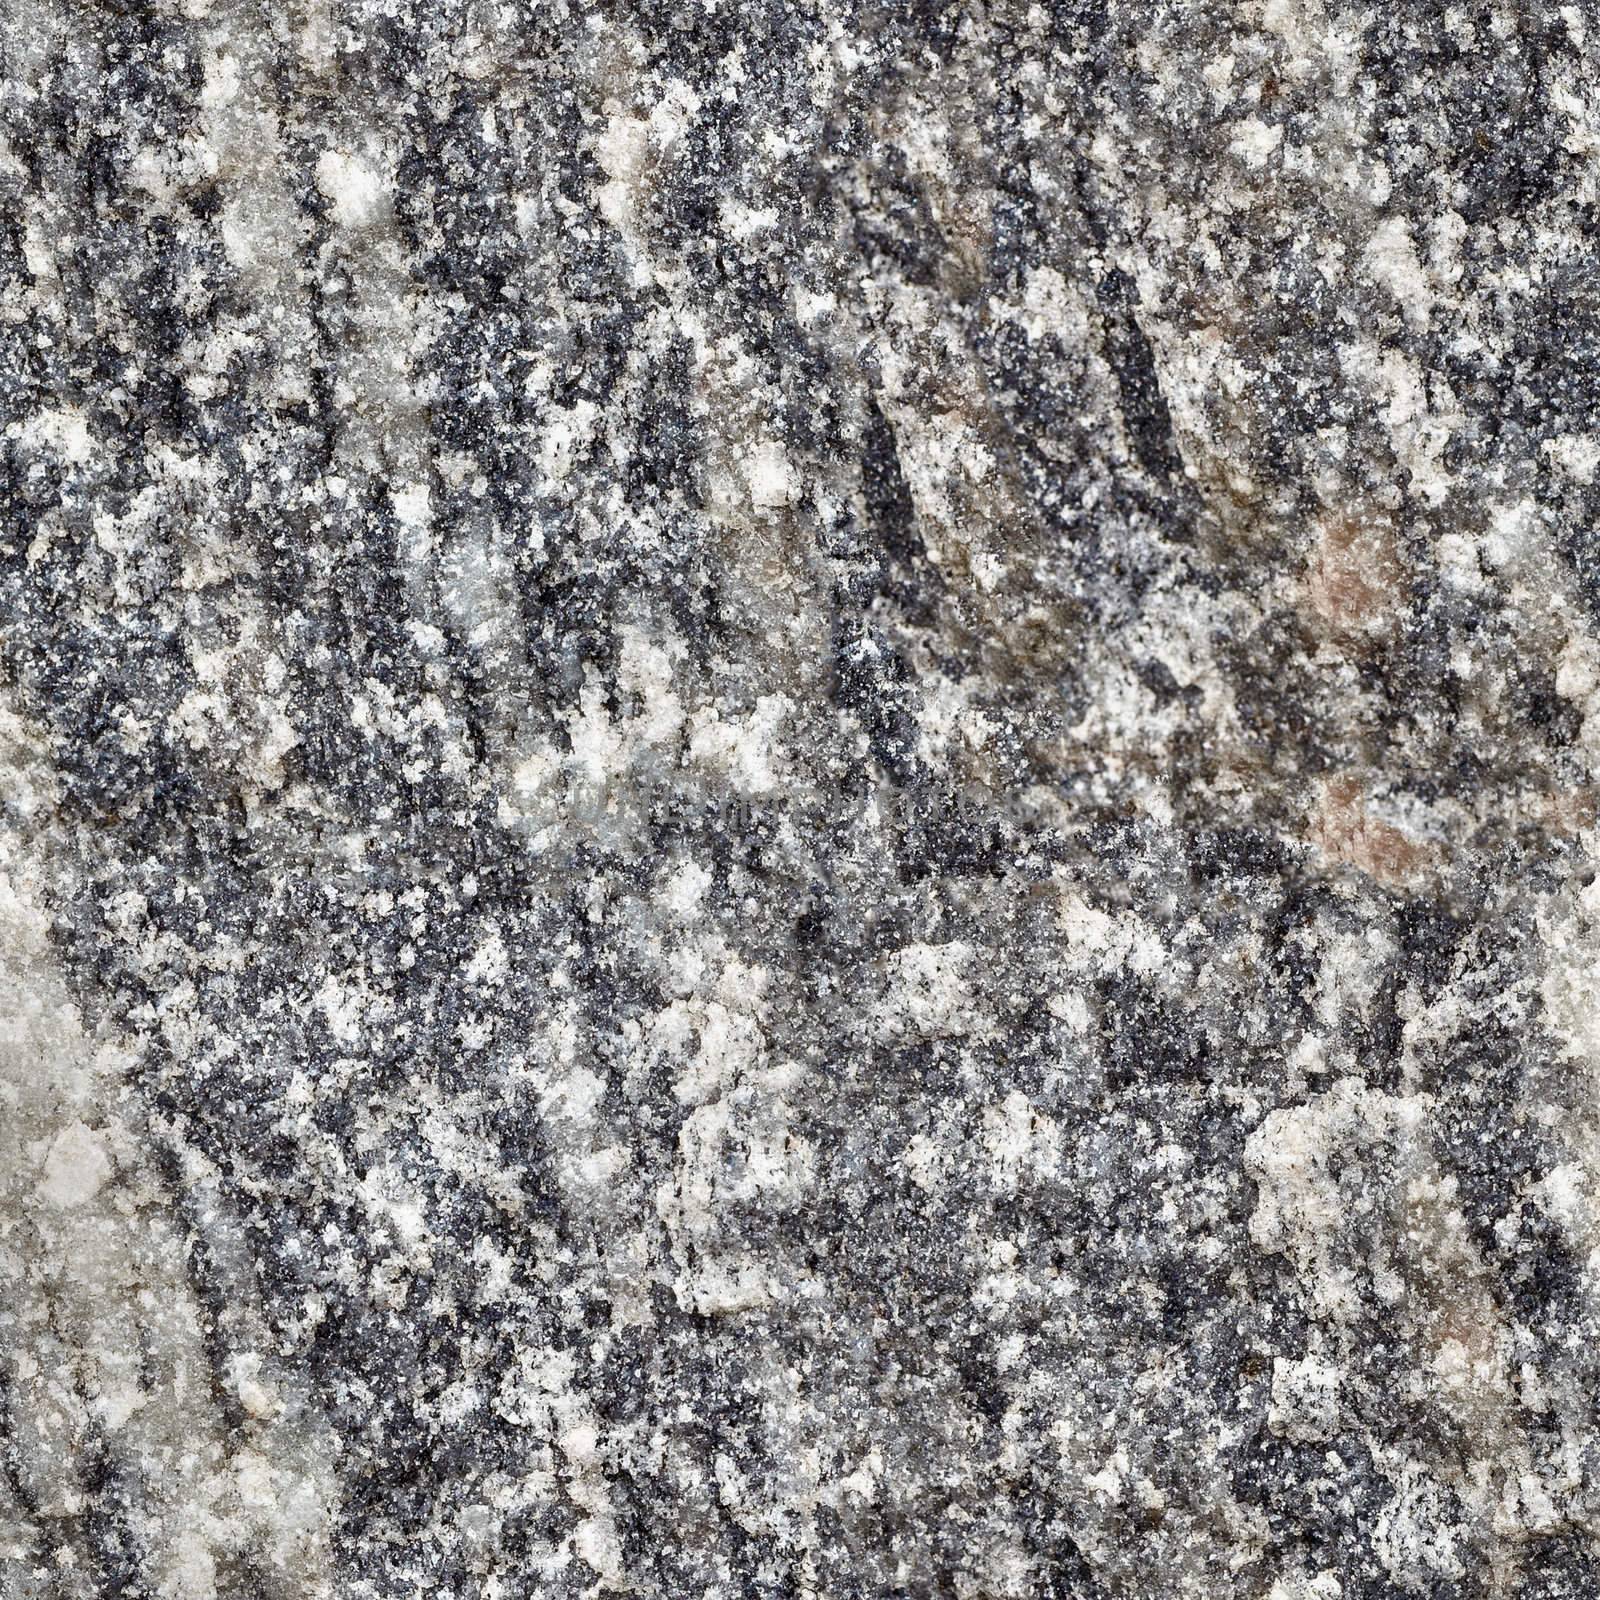 Seamless texture - rough stone surface by pzaxe